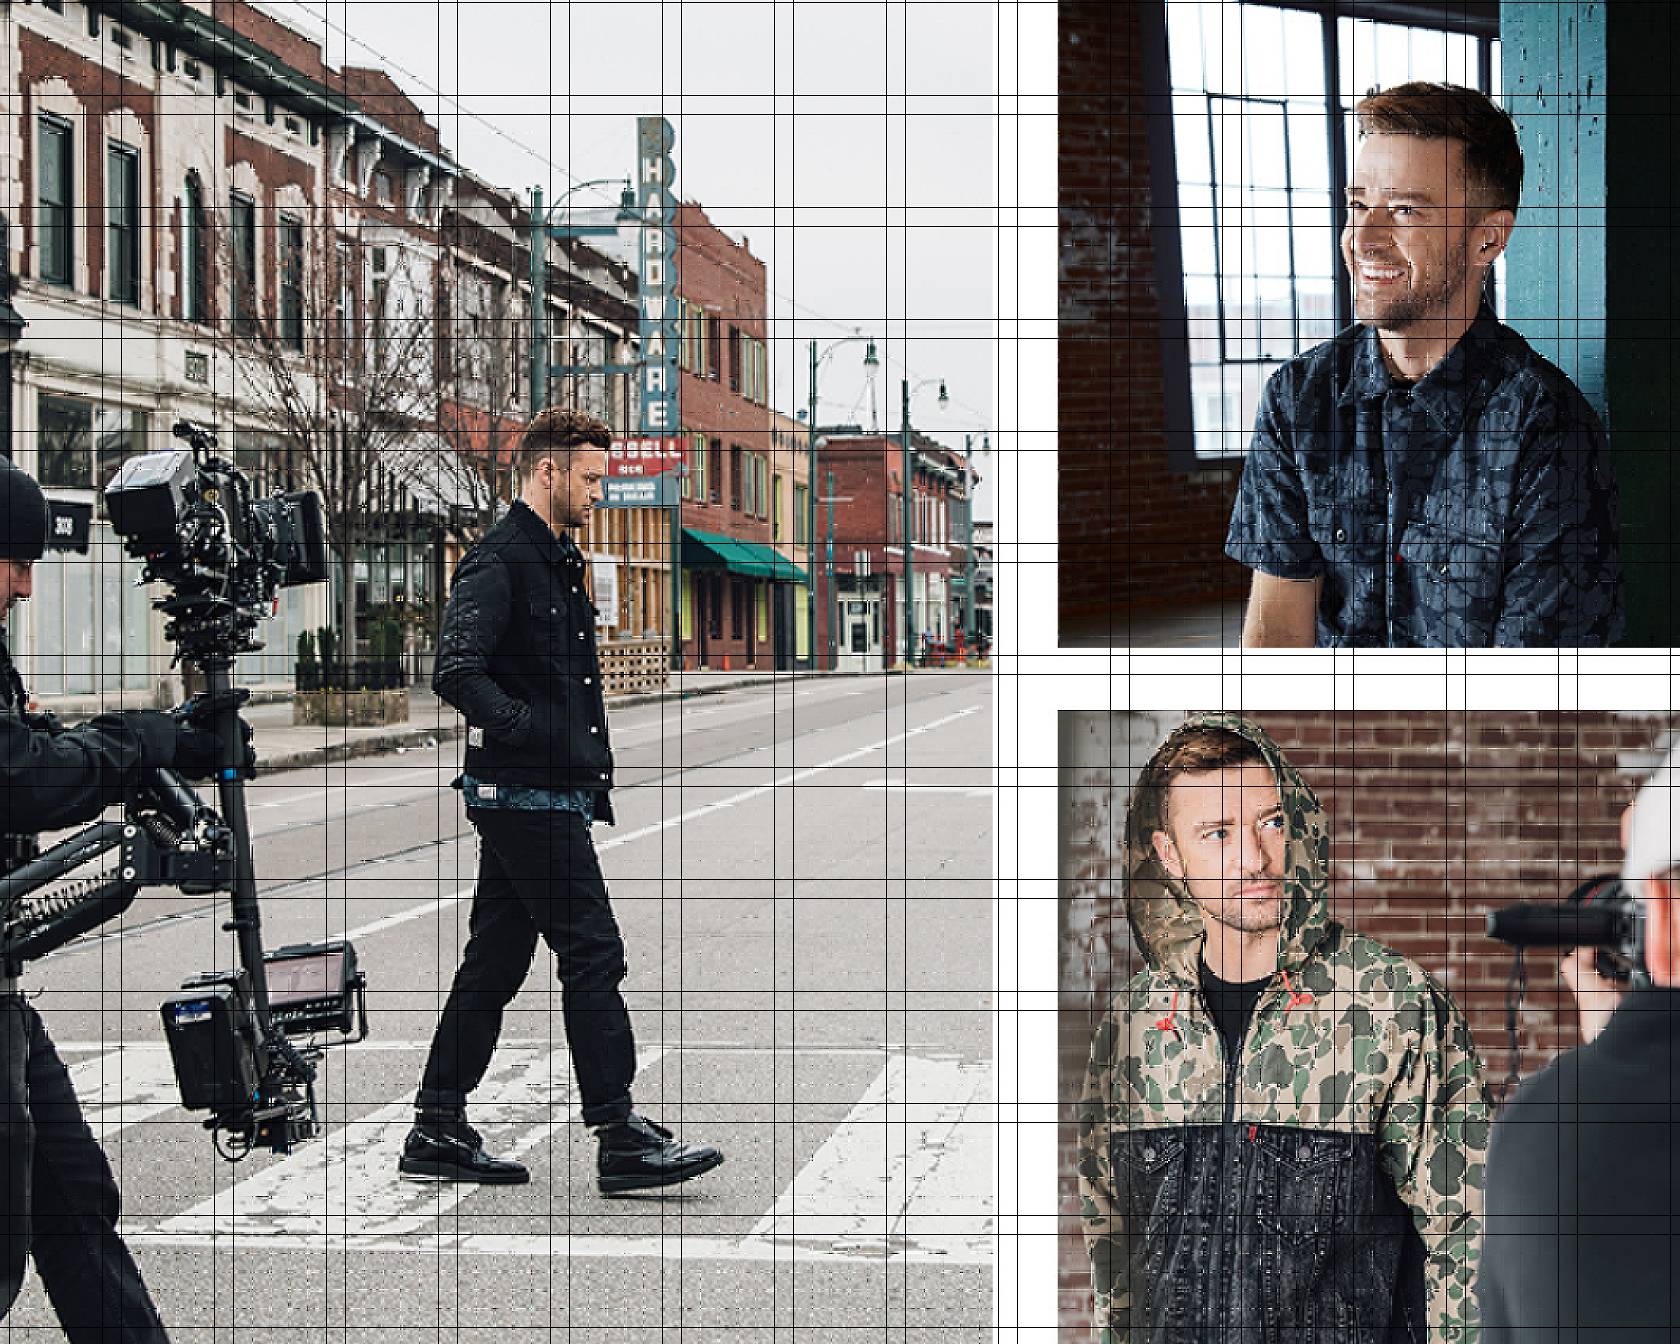 JUSTIN TIMBERLAKE OFFERS AN INSIDER’S GUIDE TO MEMPHIS